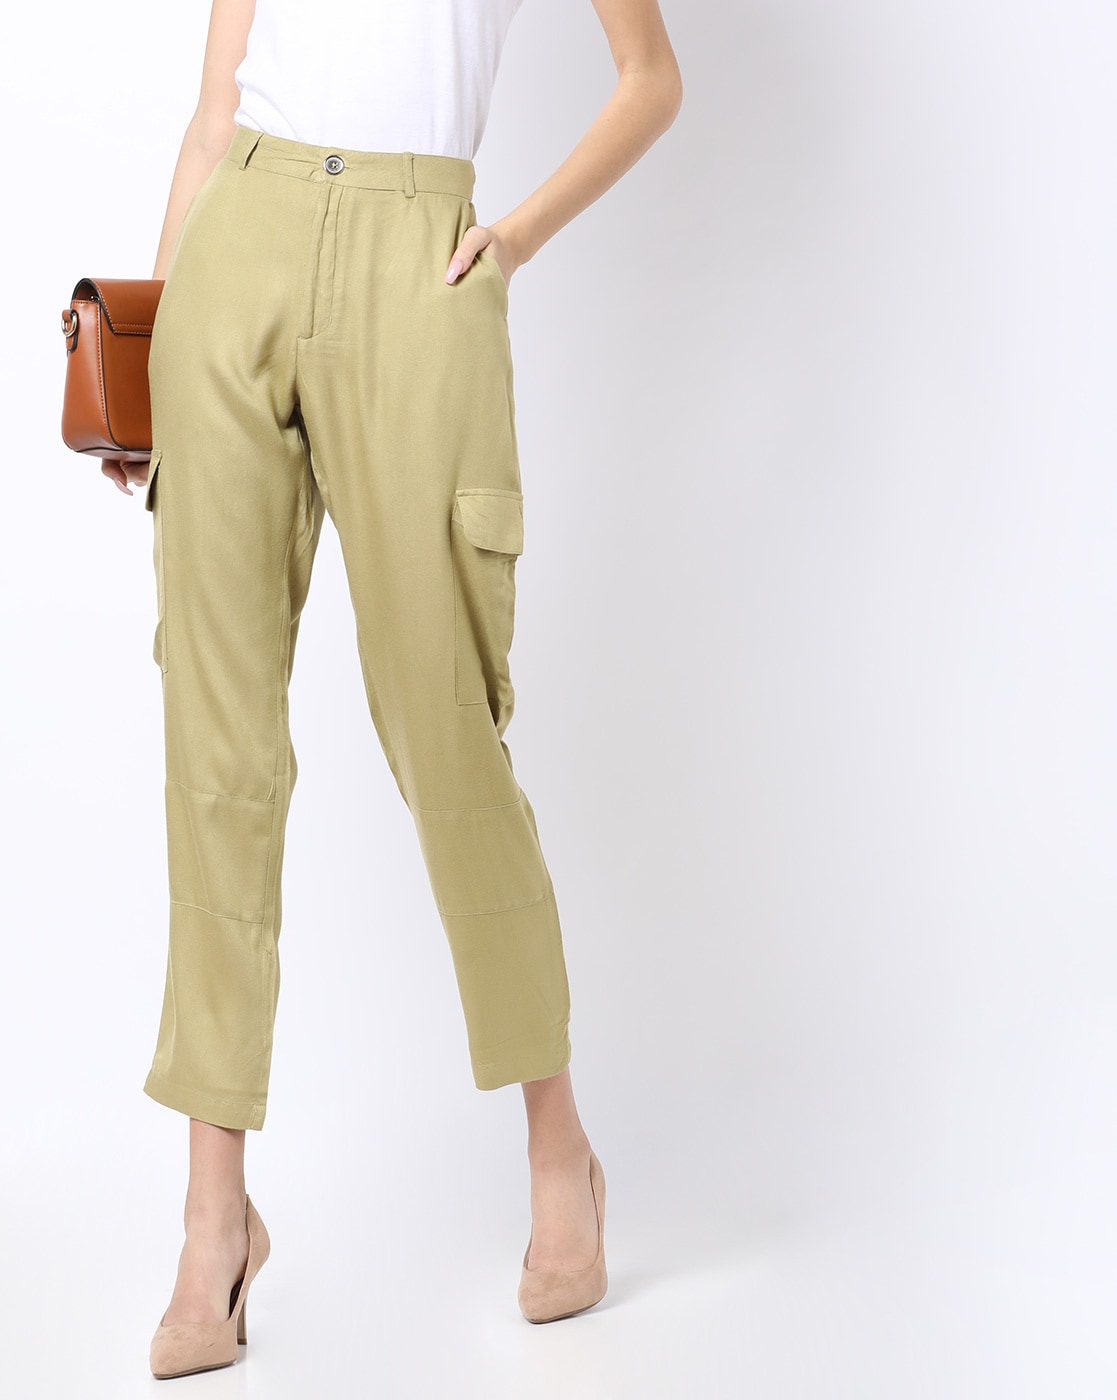 35 Best Women's Cargo Pants & How To Style Them - Glamour and Gains